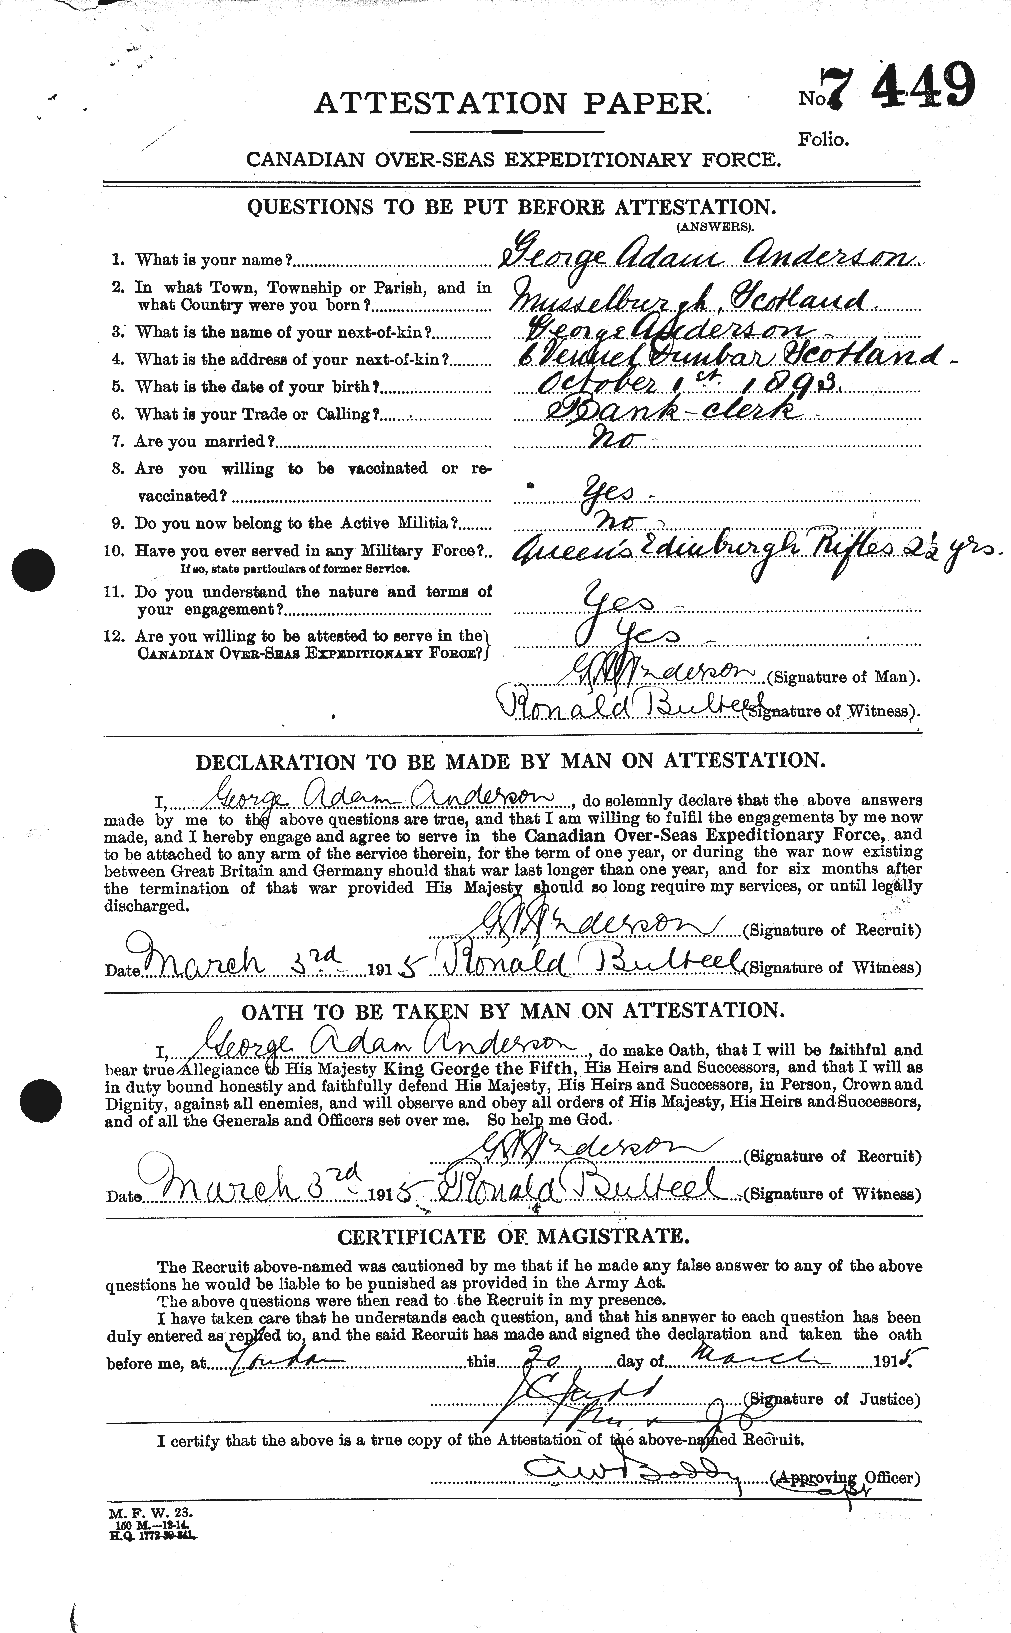 Personnel Records of the First World War - CEF 209746a